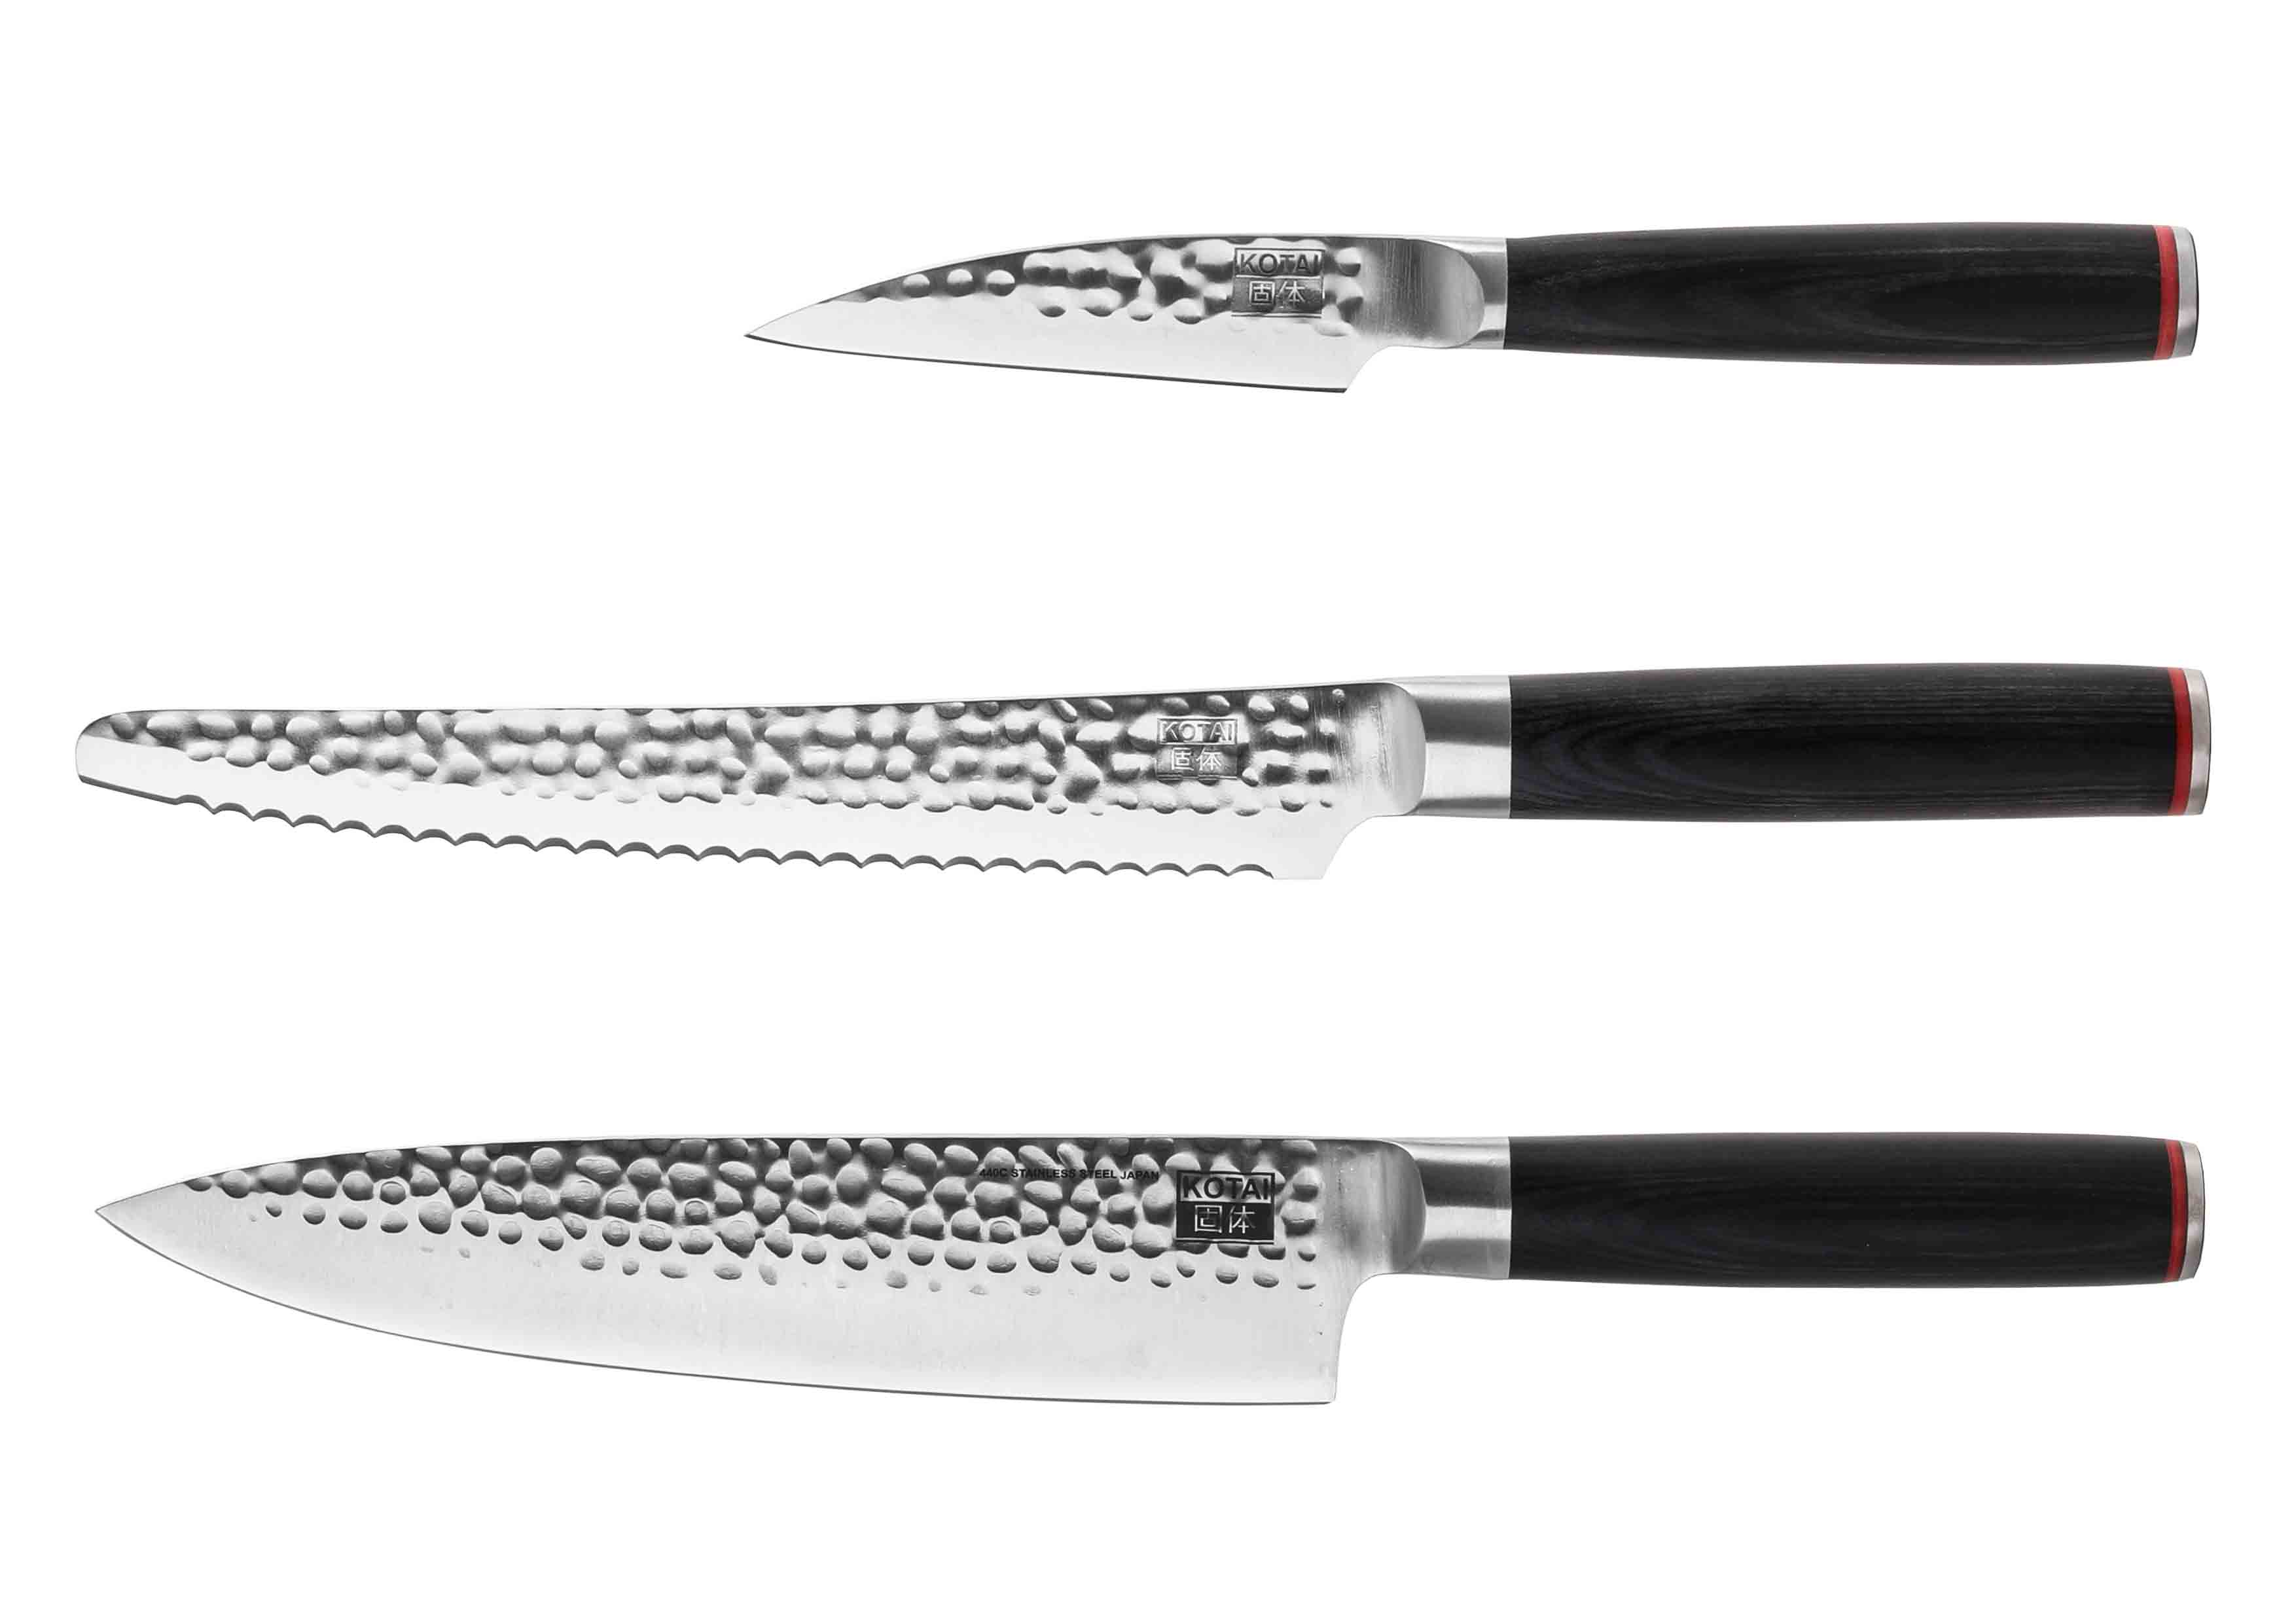 KOTAI Pakka Essential 3 Piece Knife Set with paring knife, bread knife and Gyuto on white background.